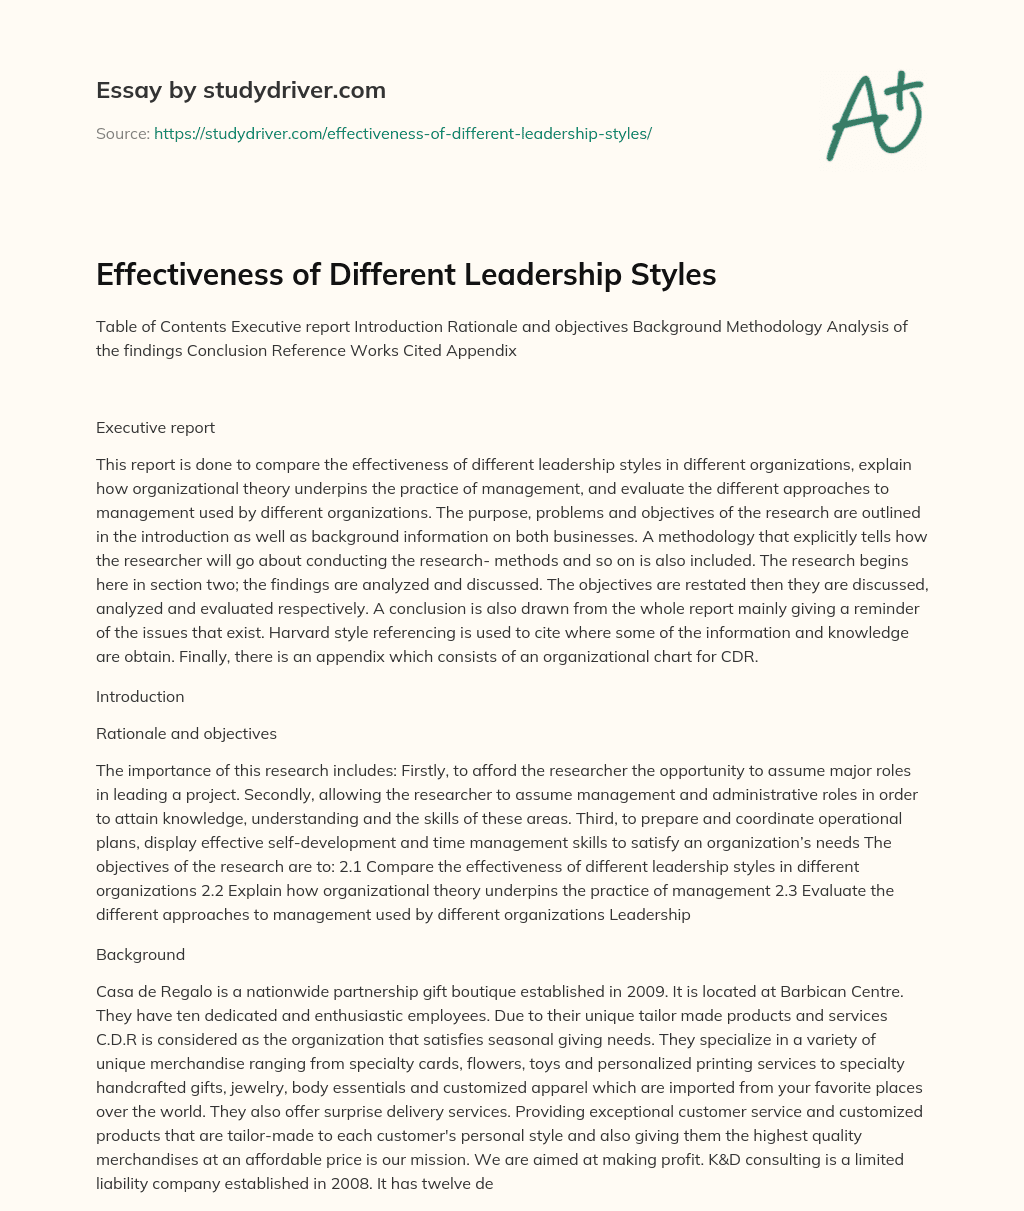 Effectiveness of Different Leadership Styles essay